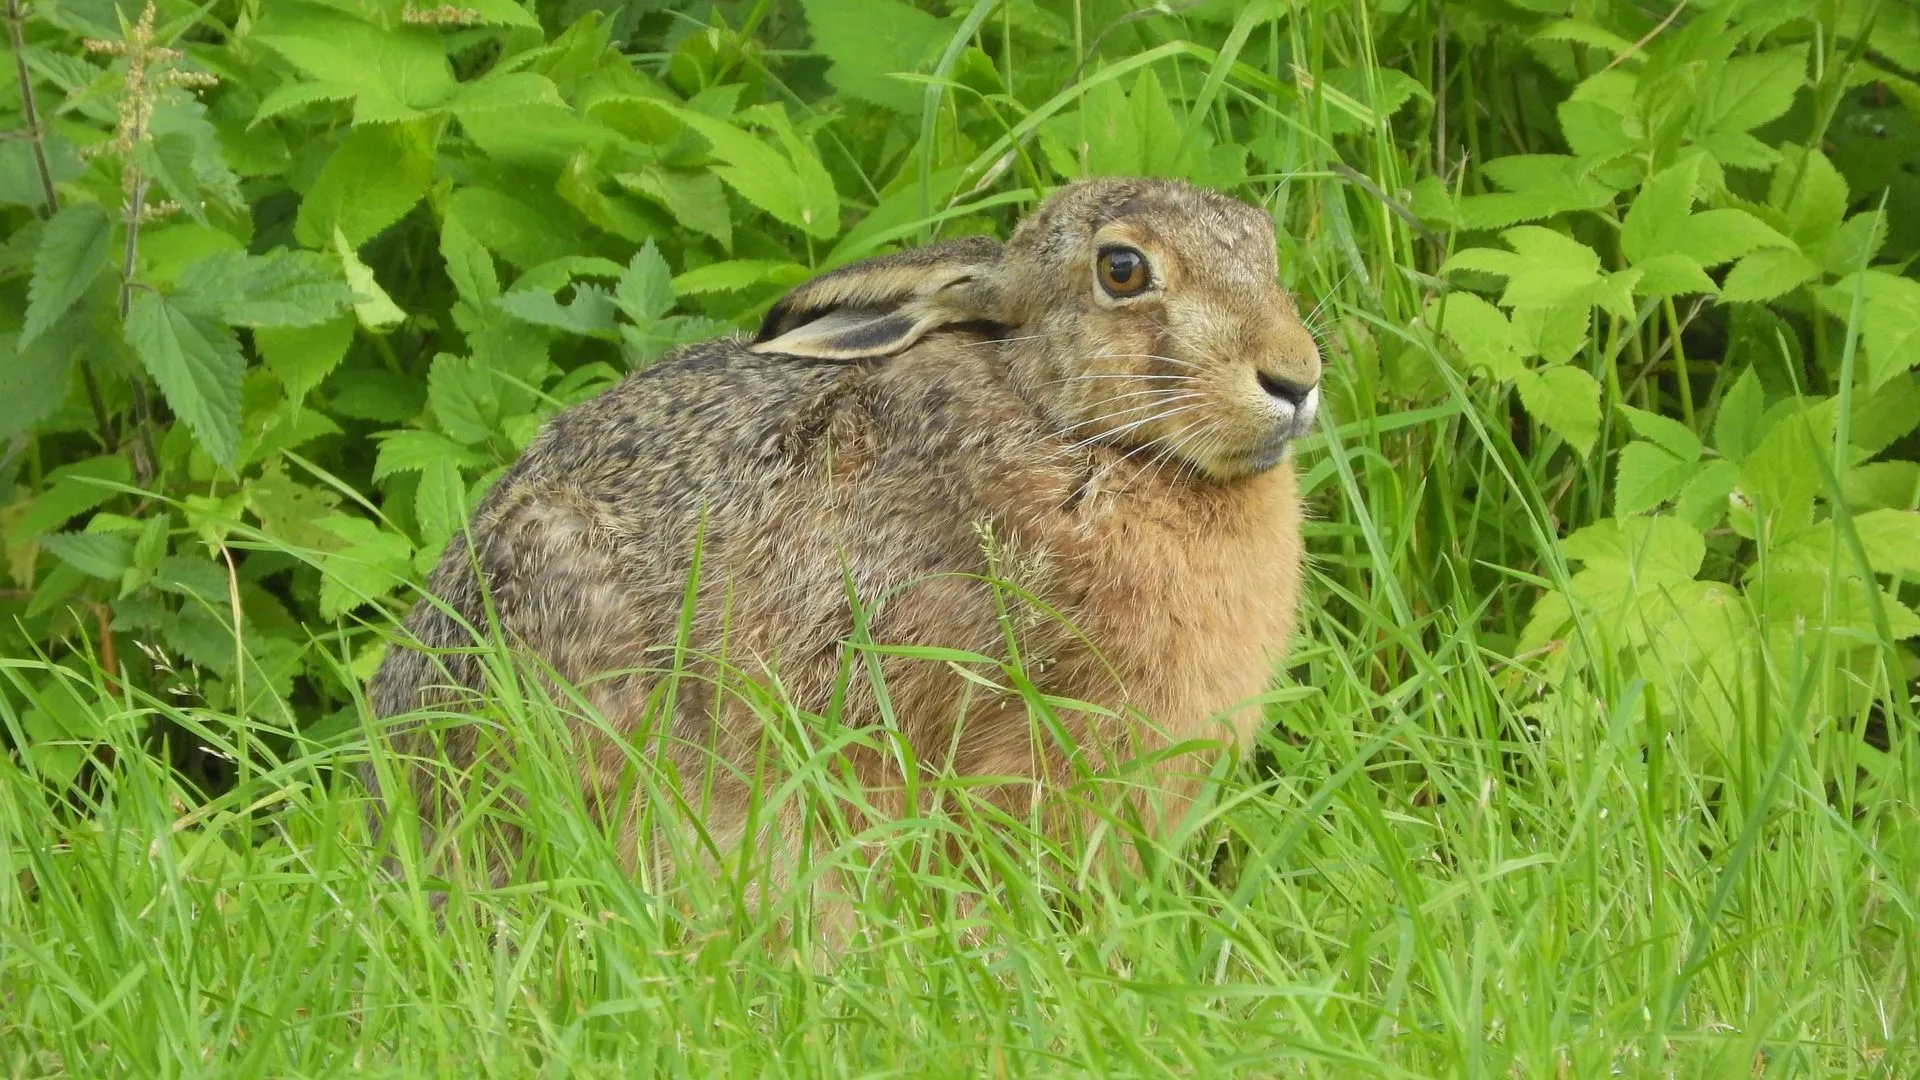 Chinese hares have whitish bellies.